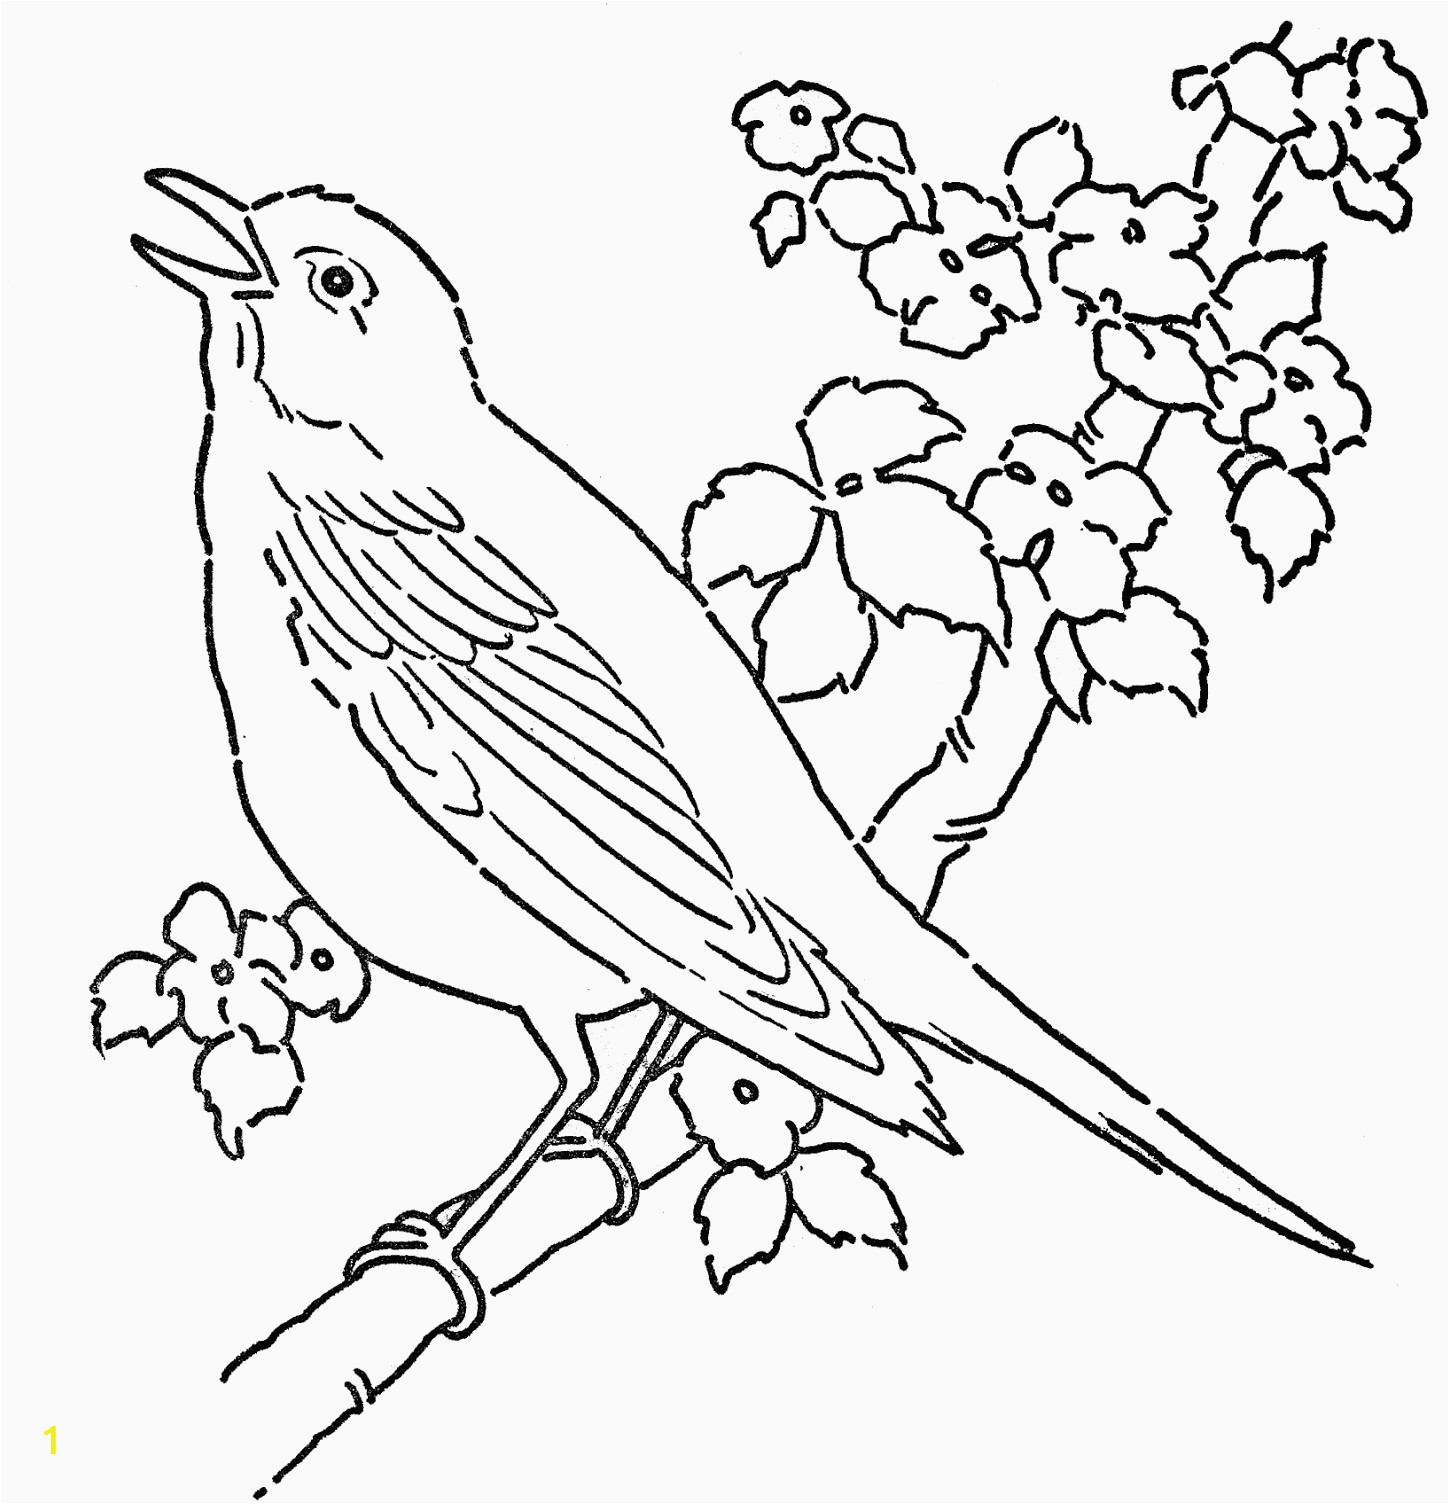 coloring page of a bird nest bird coloring pages fresh free bird coloring pages awesome best od of coloring page of a bird nest